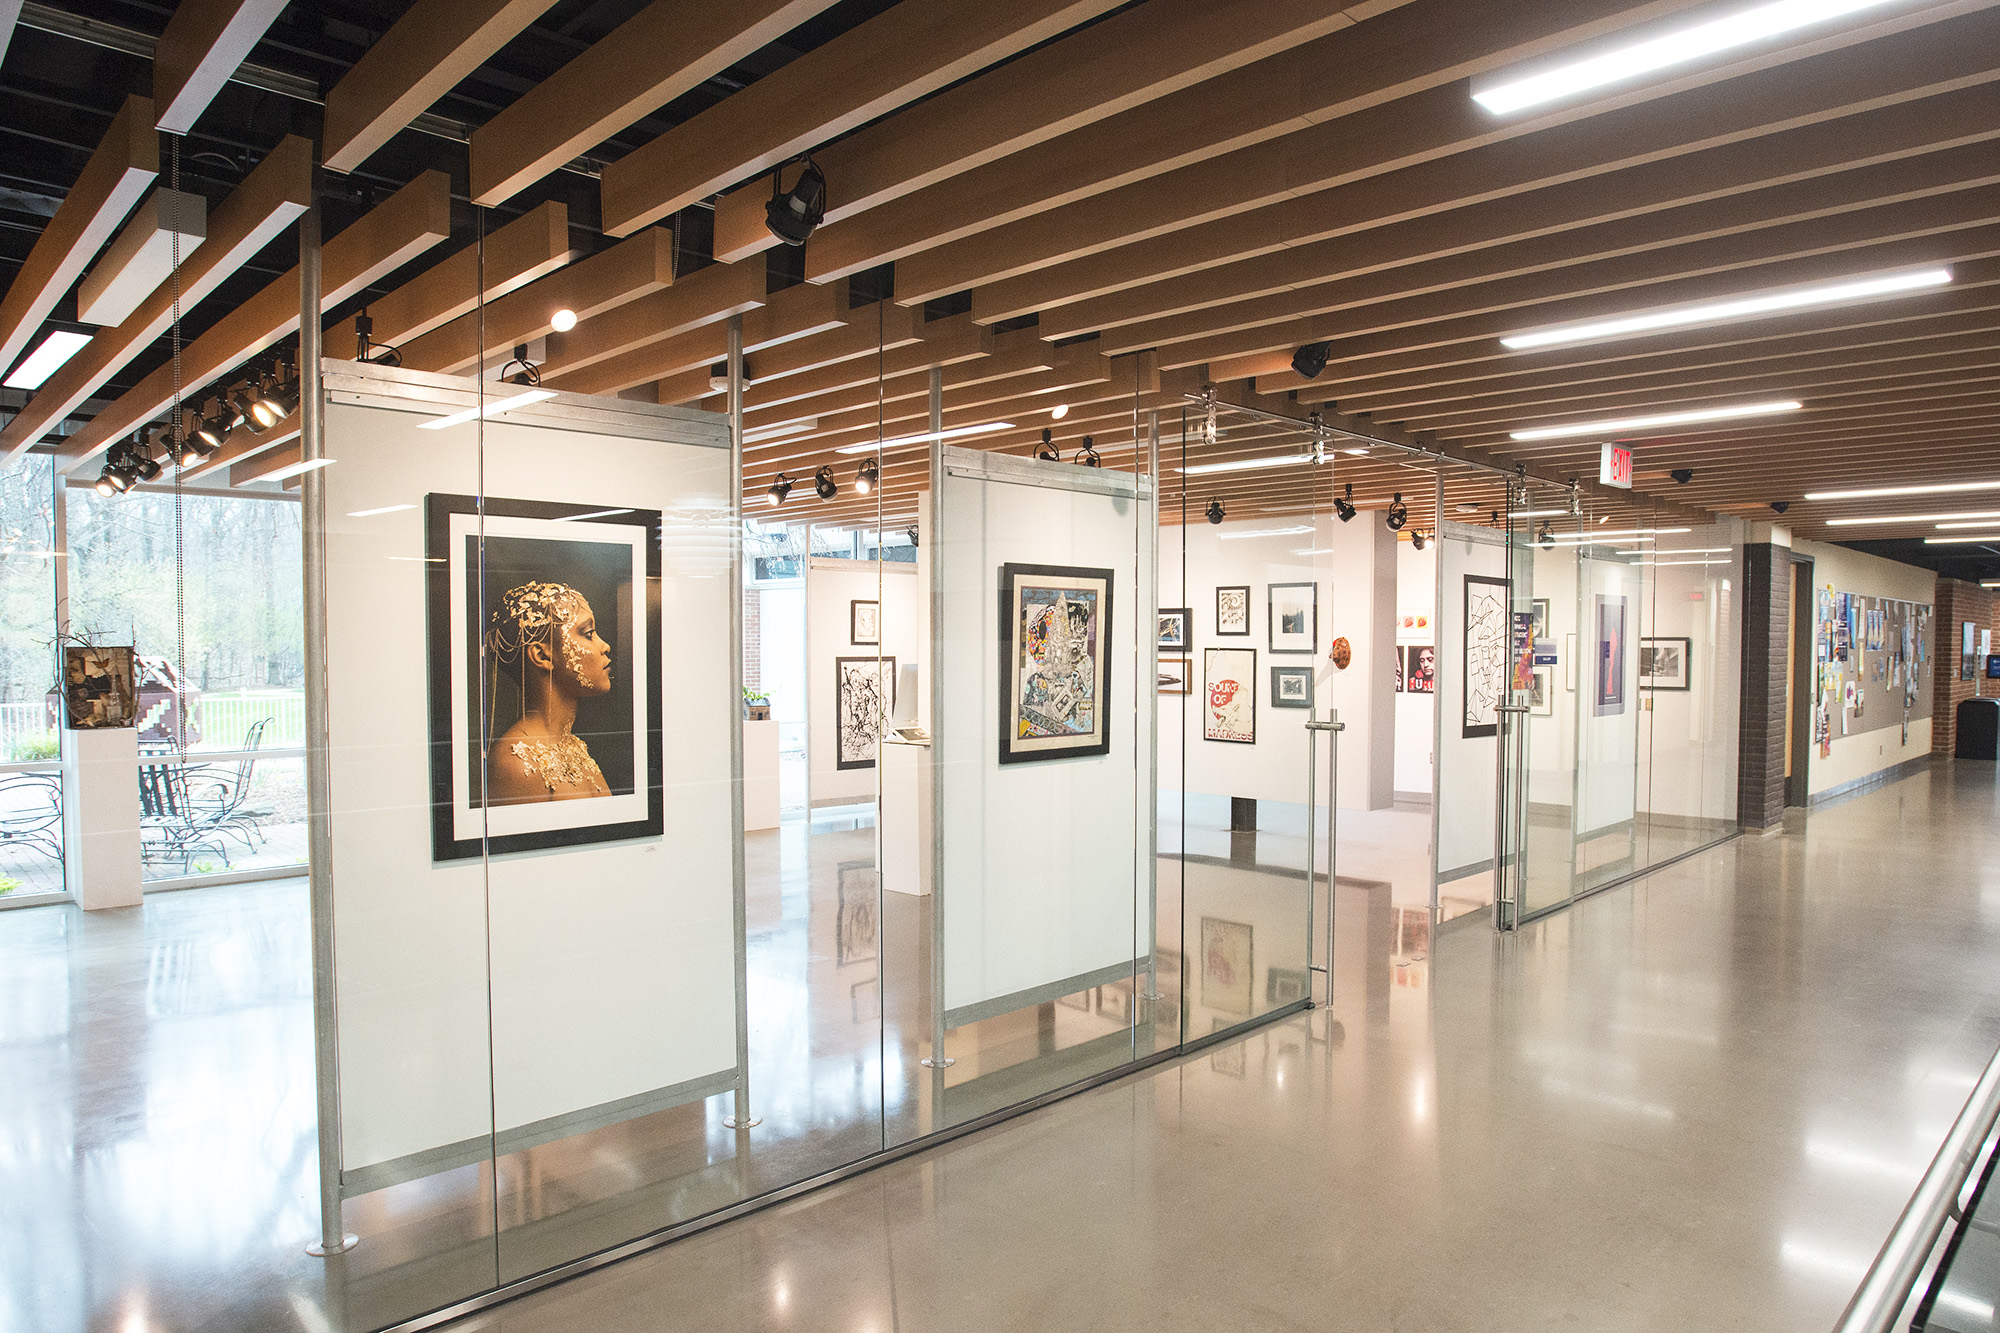 KCC's 2019 Annual Student Art Exhibition on display in the College's DeVries Gallery.